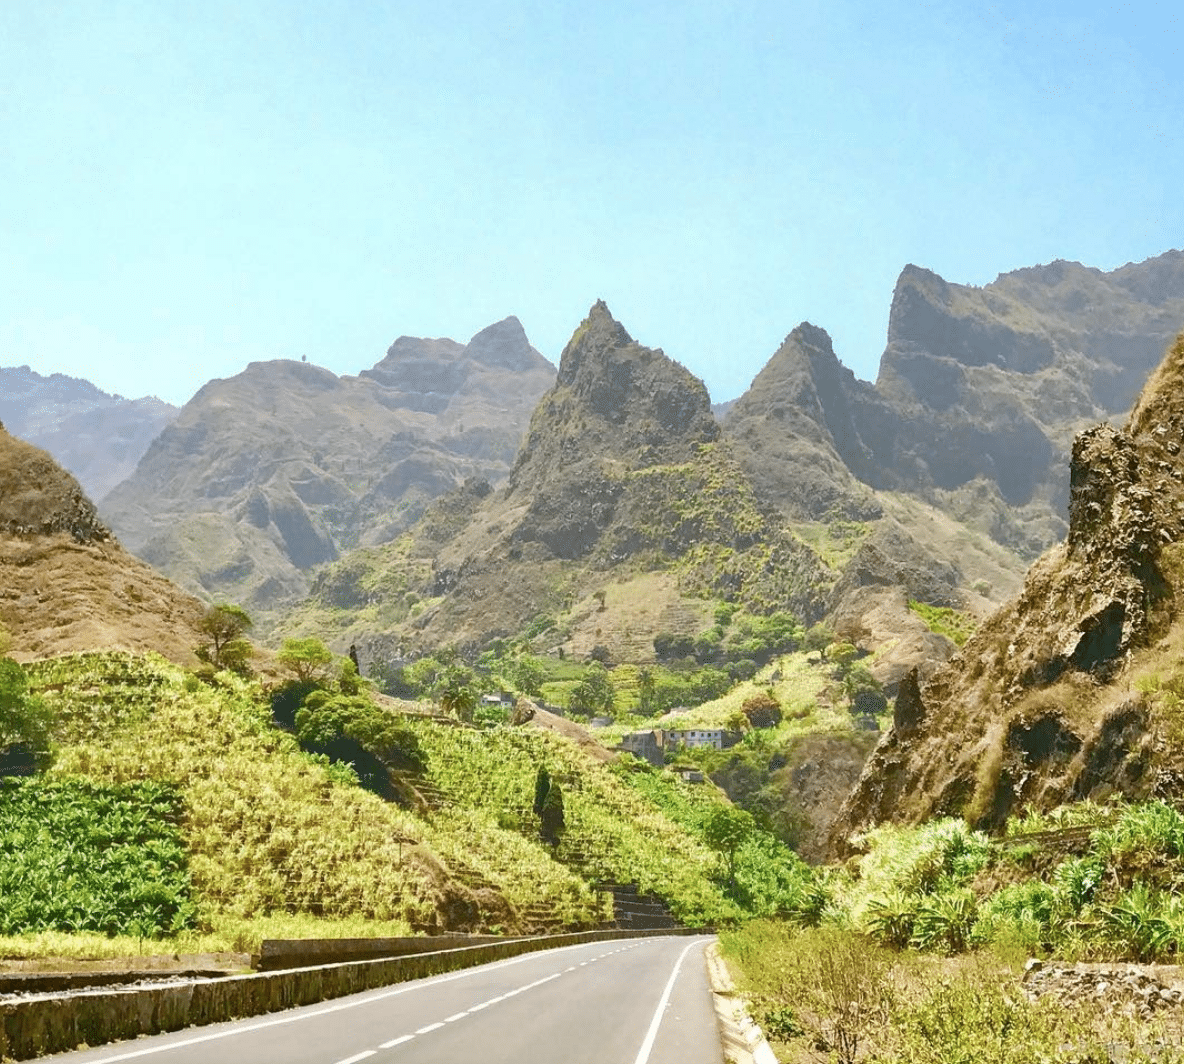 Destination Spotlight: These Views of Cape Verde Will Blow You Away